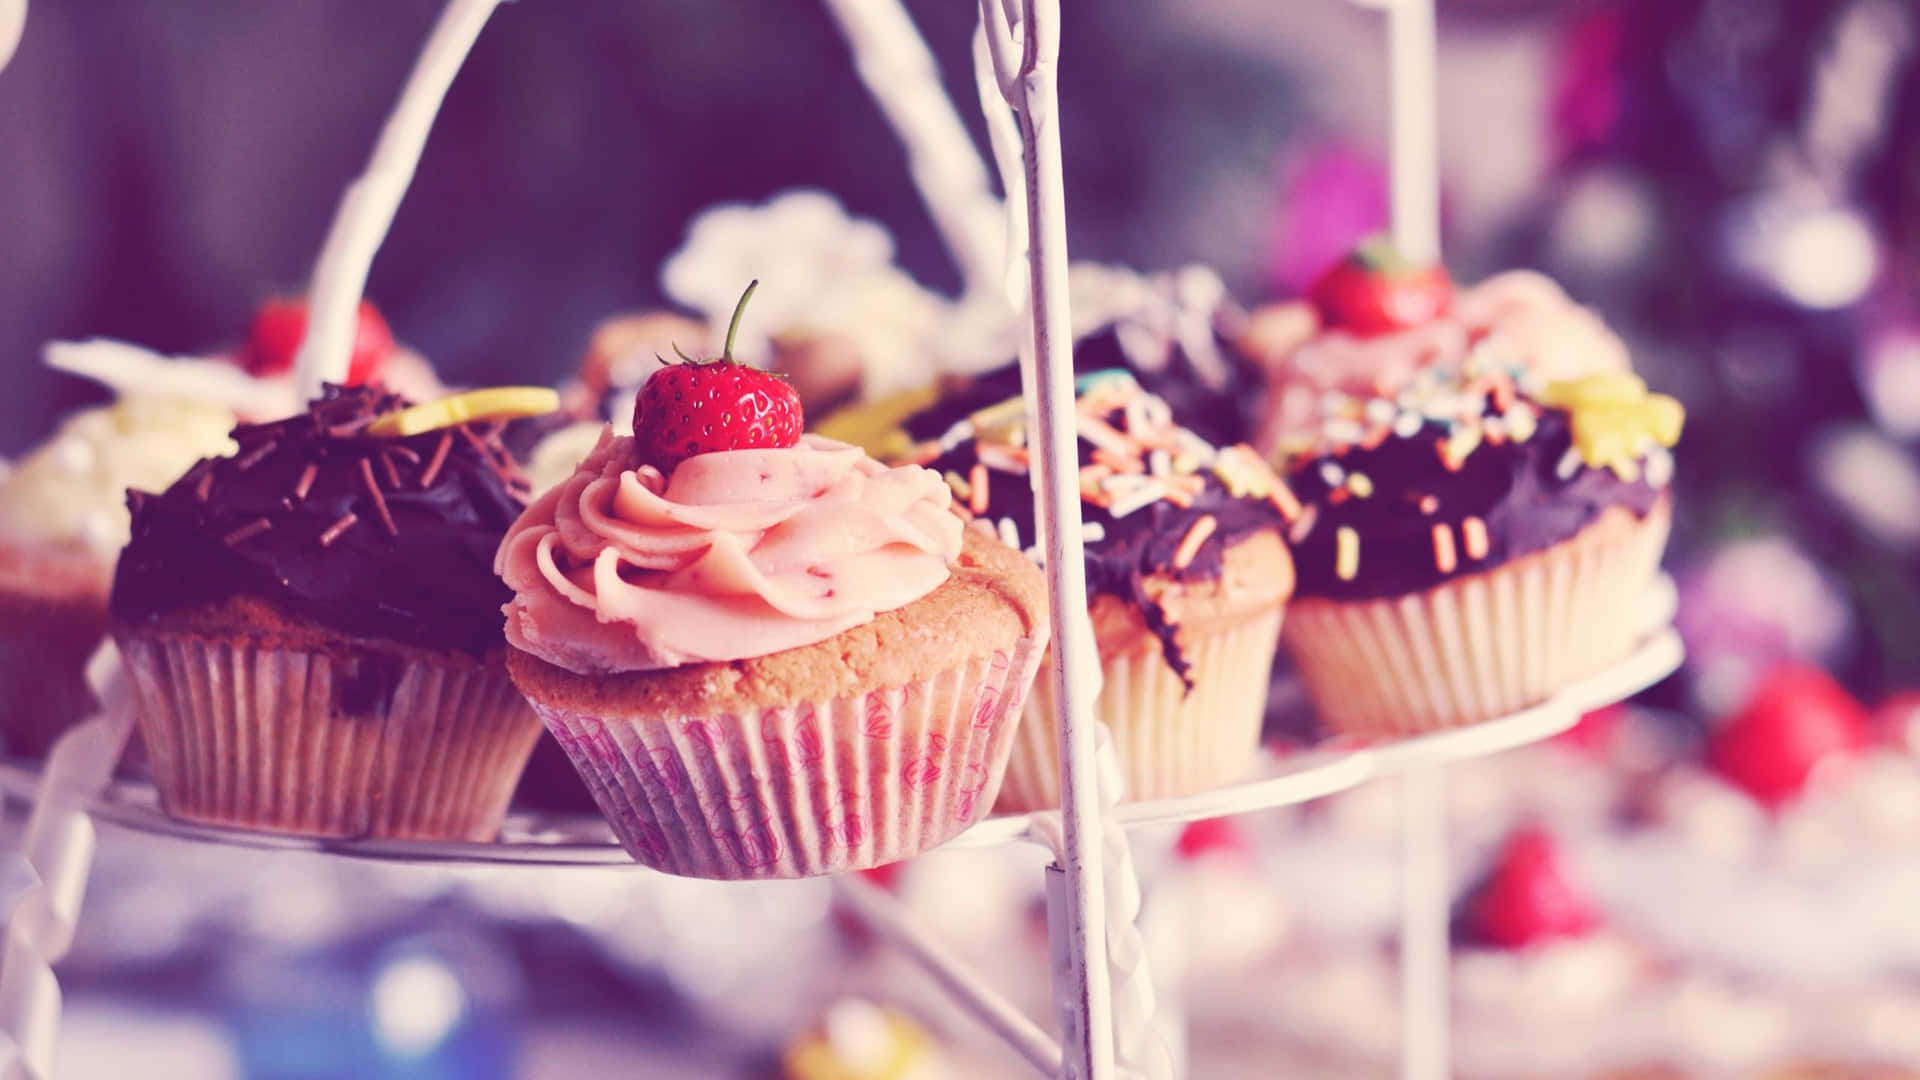 Deliciously Adorable Cupcake - Your Sweet Treat Wallpaper